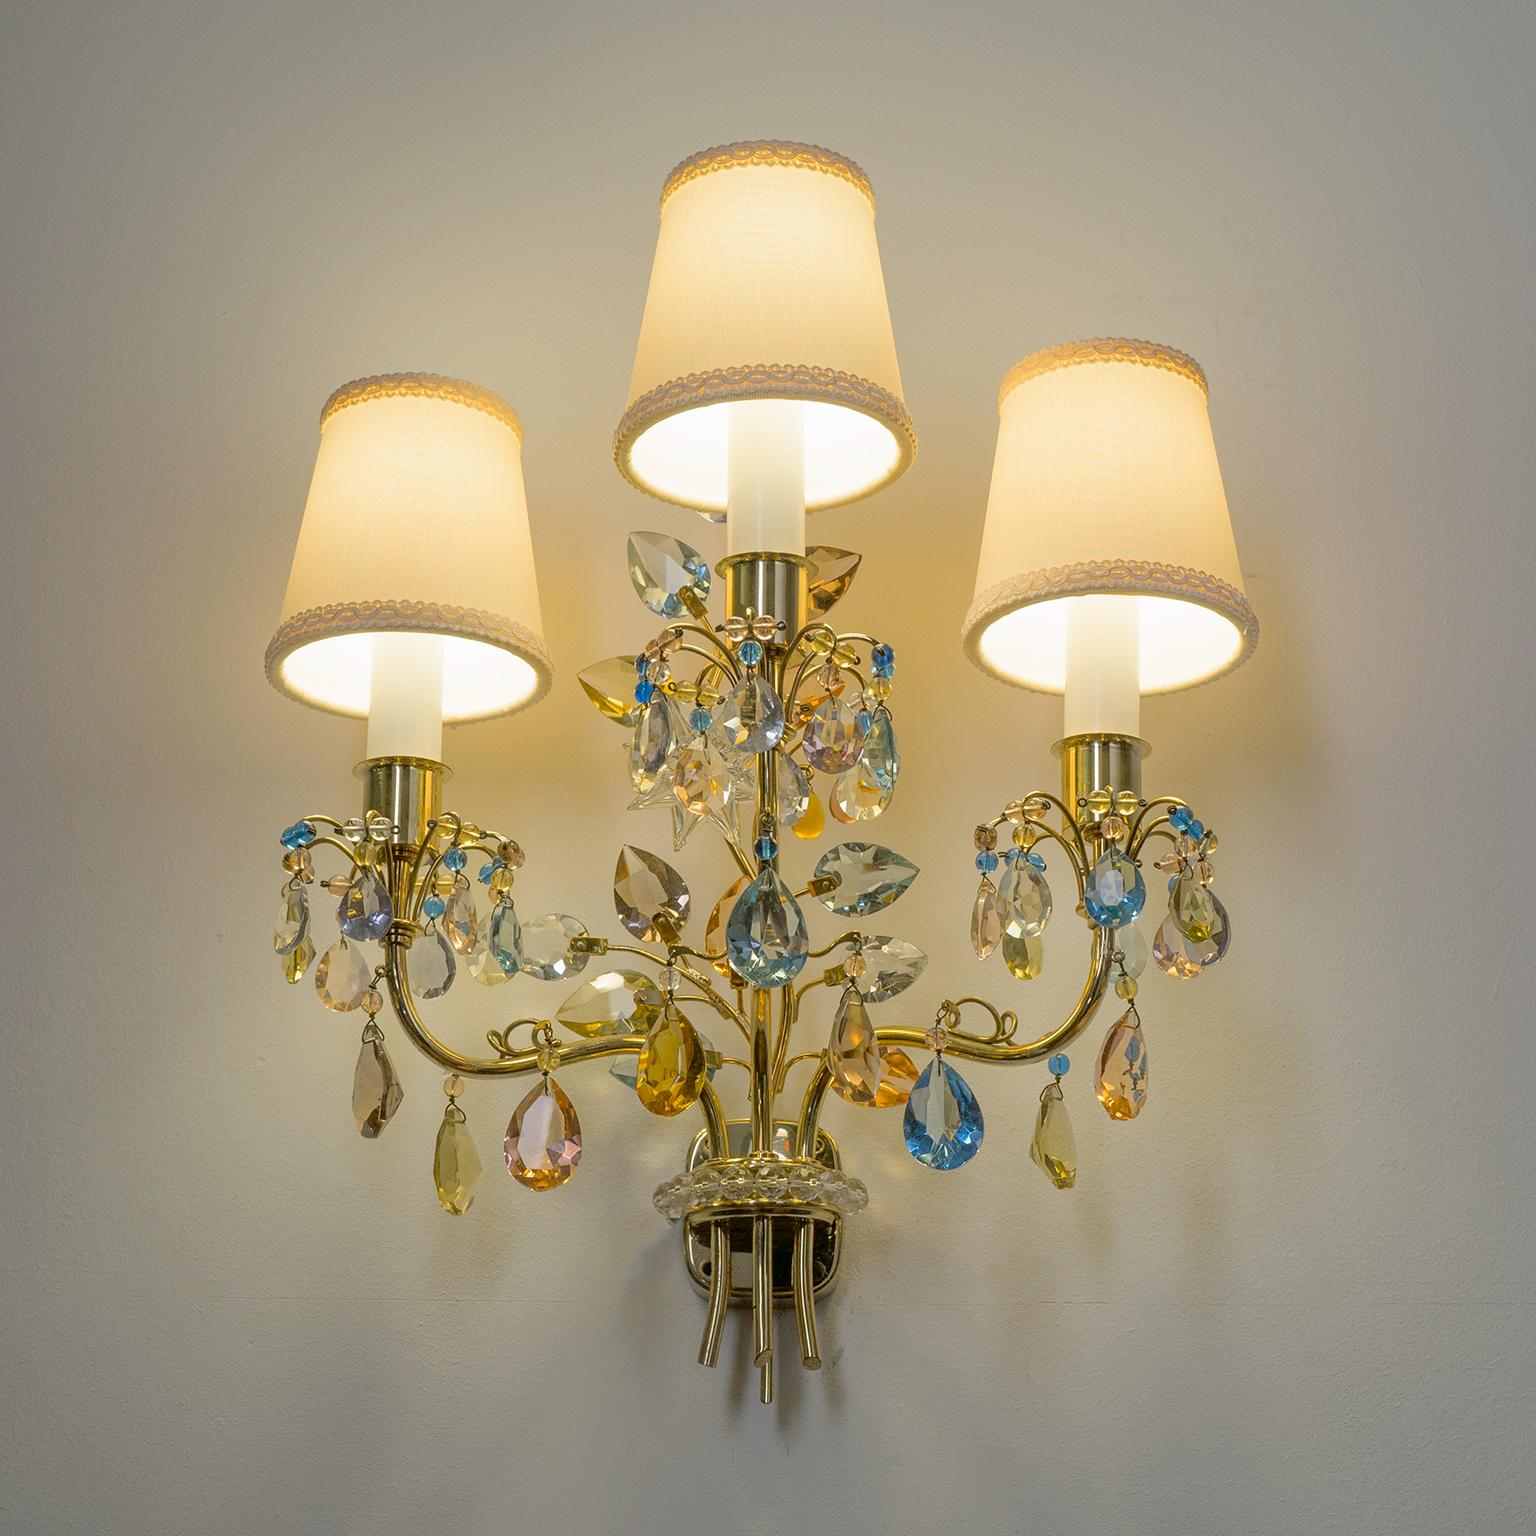 Mid-Century Modern J&L Lobmeyr Wall Lights, 1950s, Colored Crystal and Brass